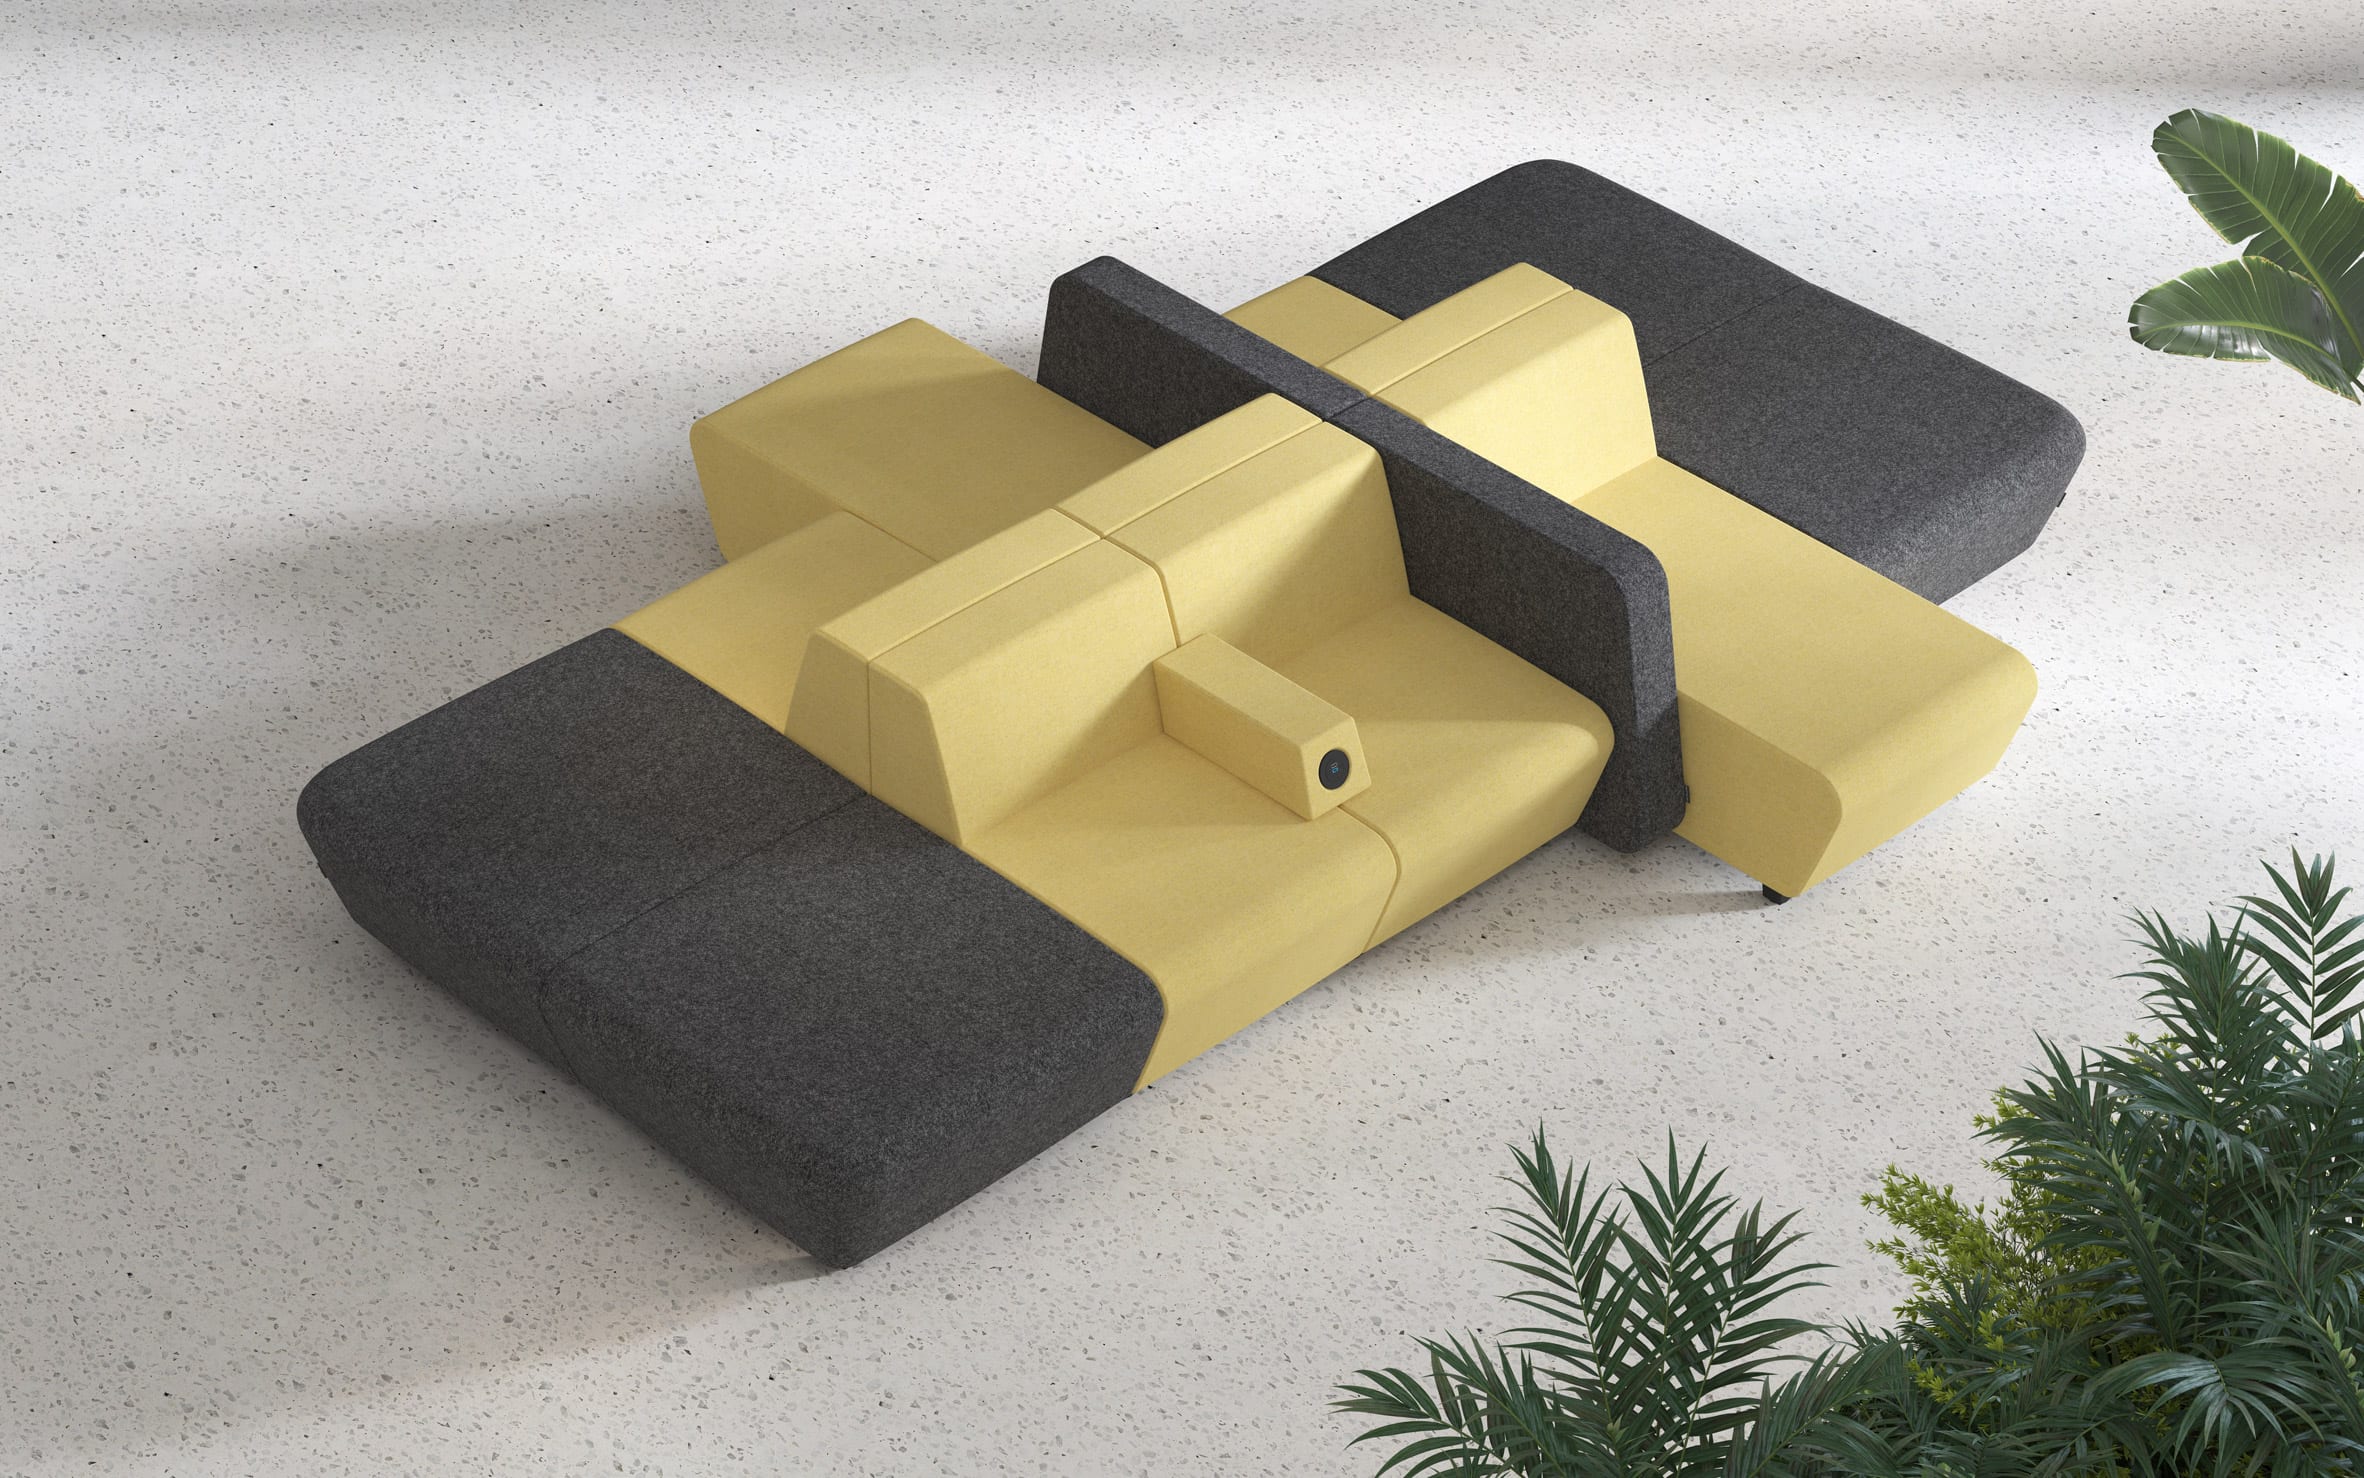 Yellow and grey modular seating with armrests that have in-built chargers